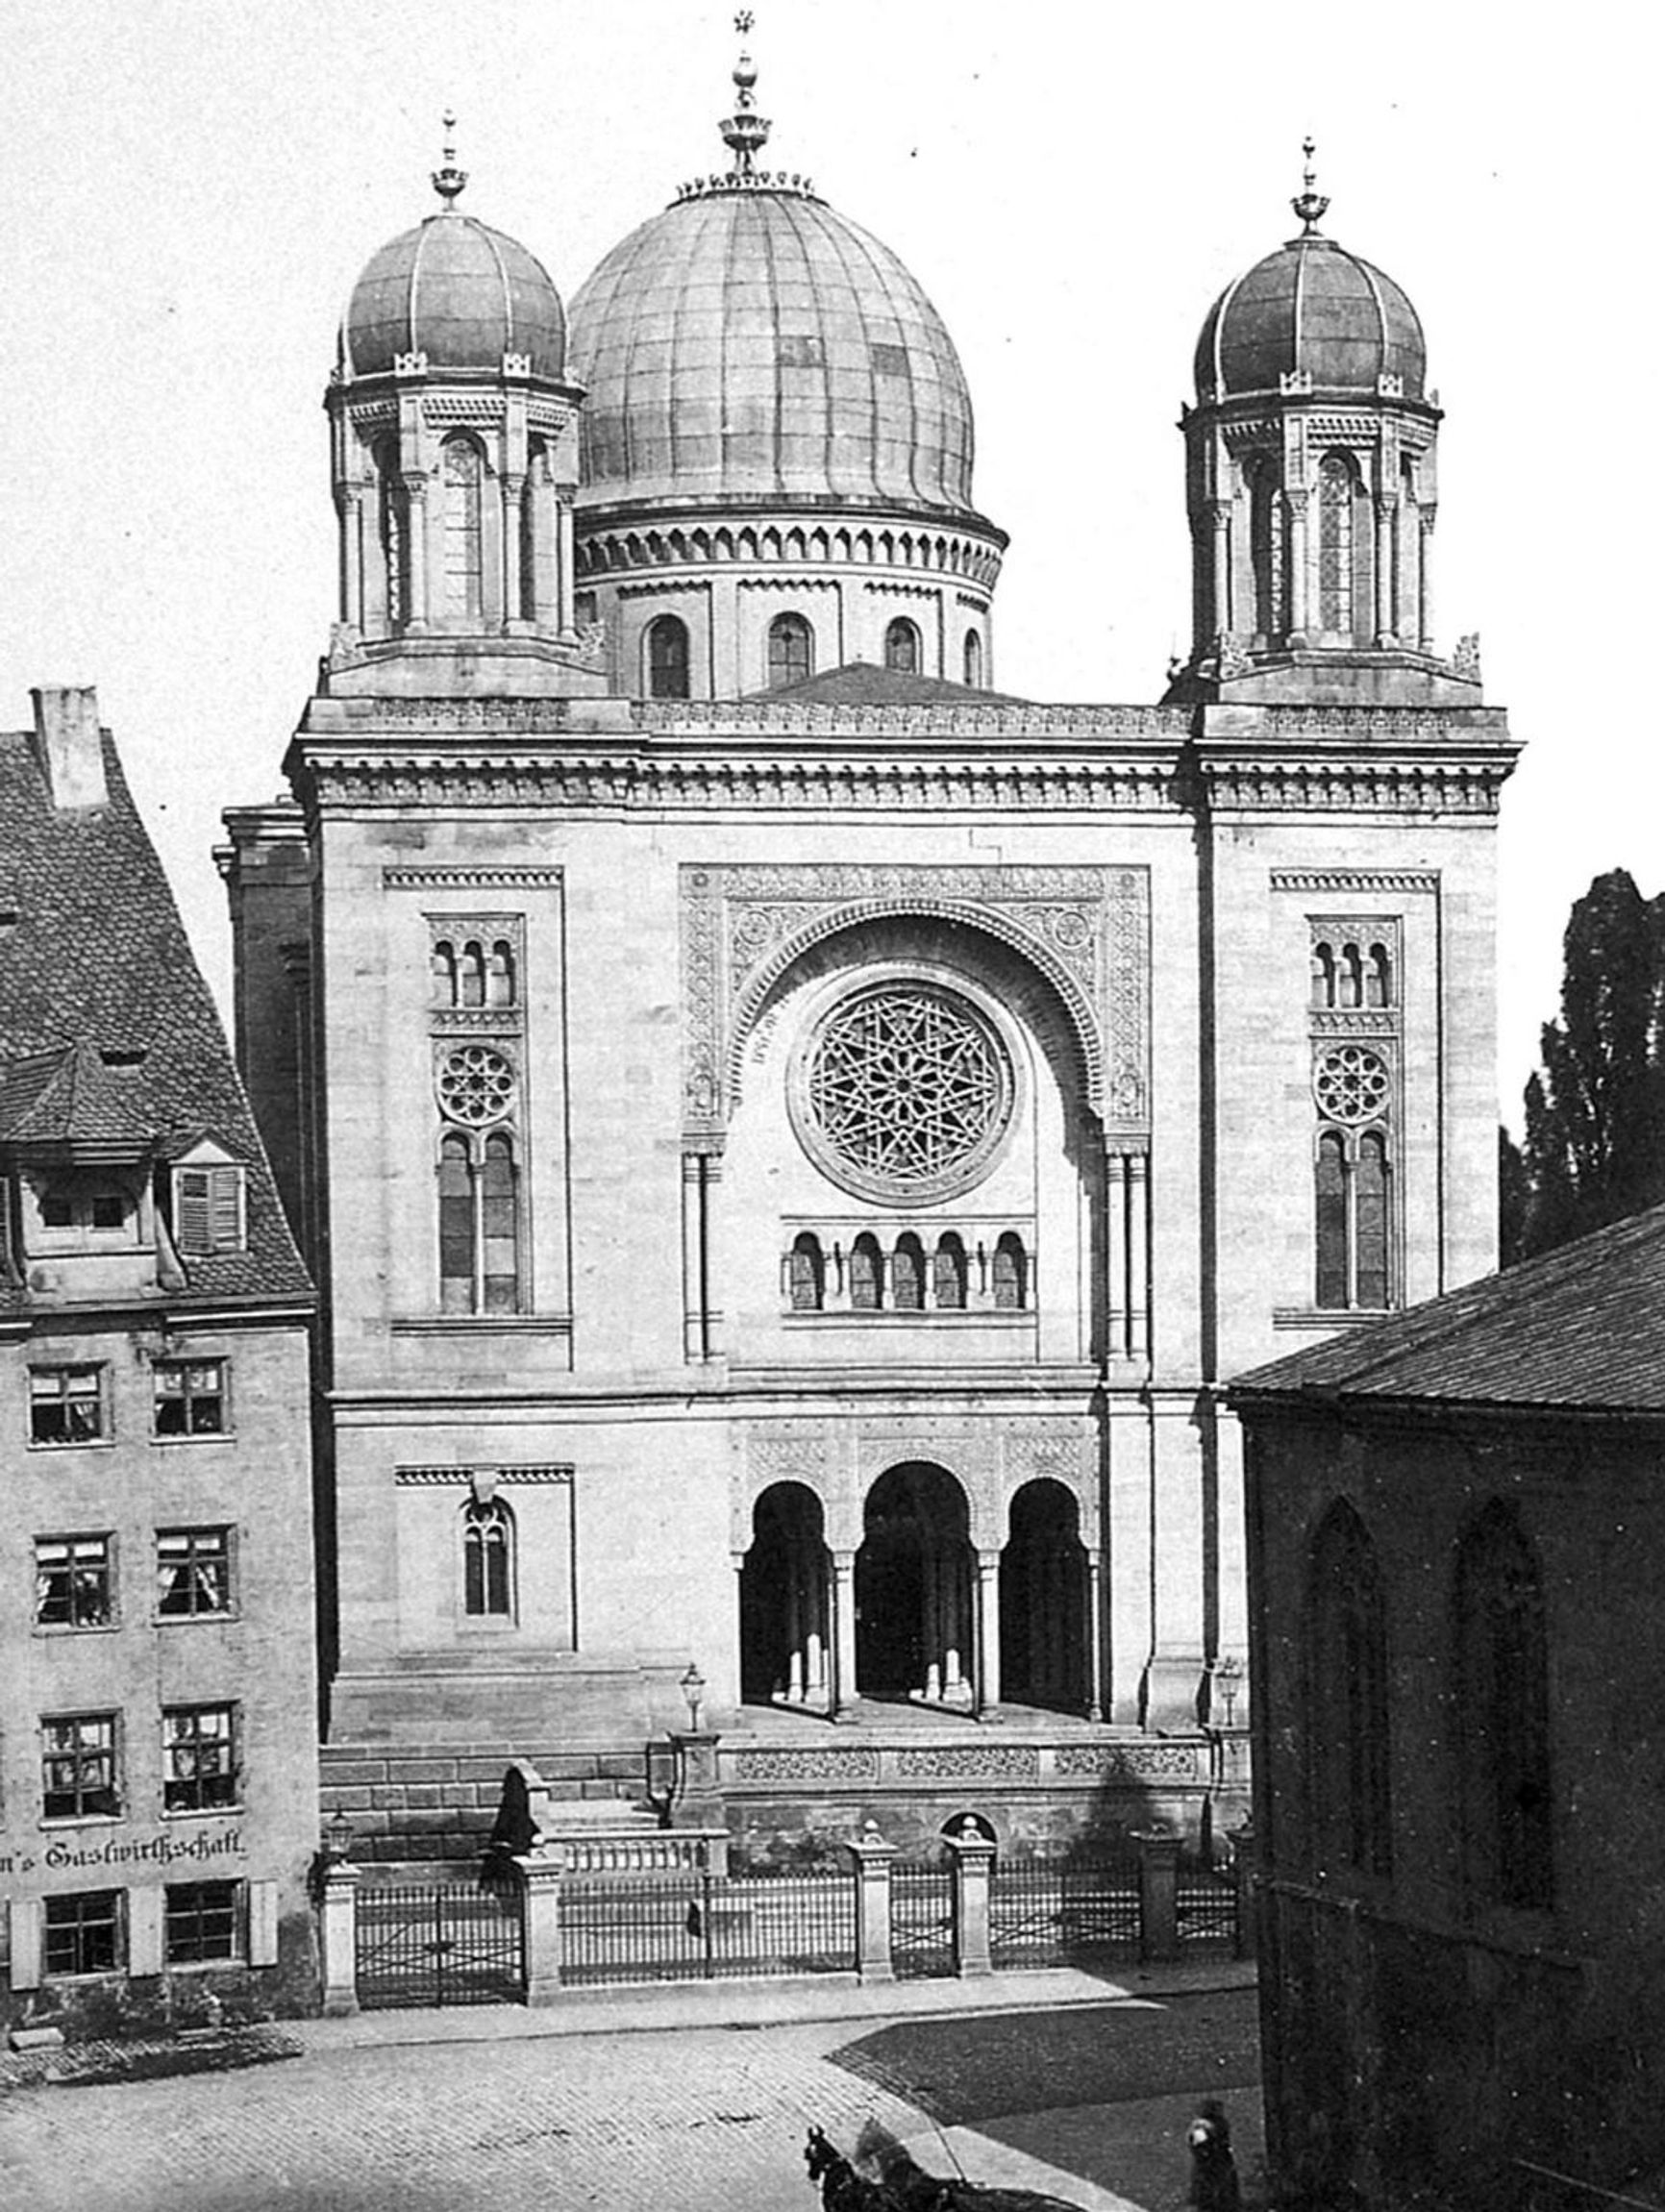 The synagogue in Nuremberg